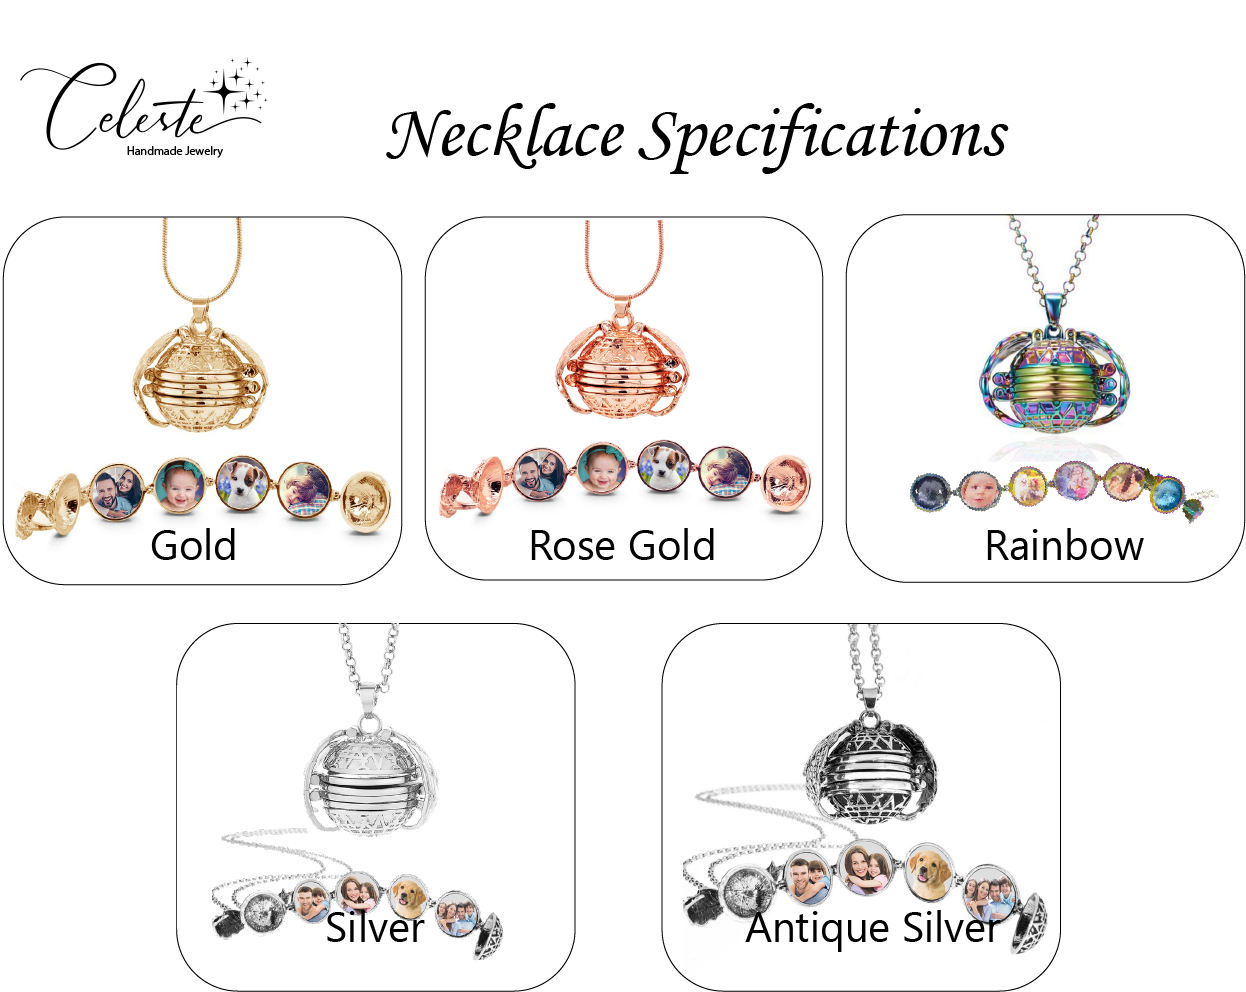 O - Expanding Photo Locket Angel Wings Ball Pendant Necklace 4-8 photos Rose Gold Silver Rainbow Gift